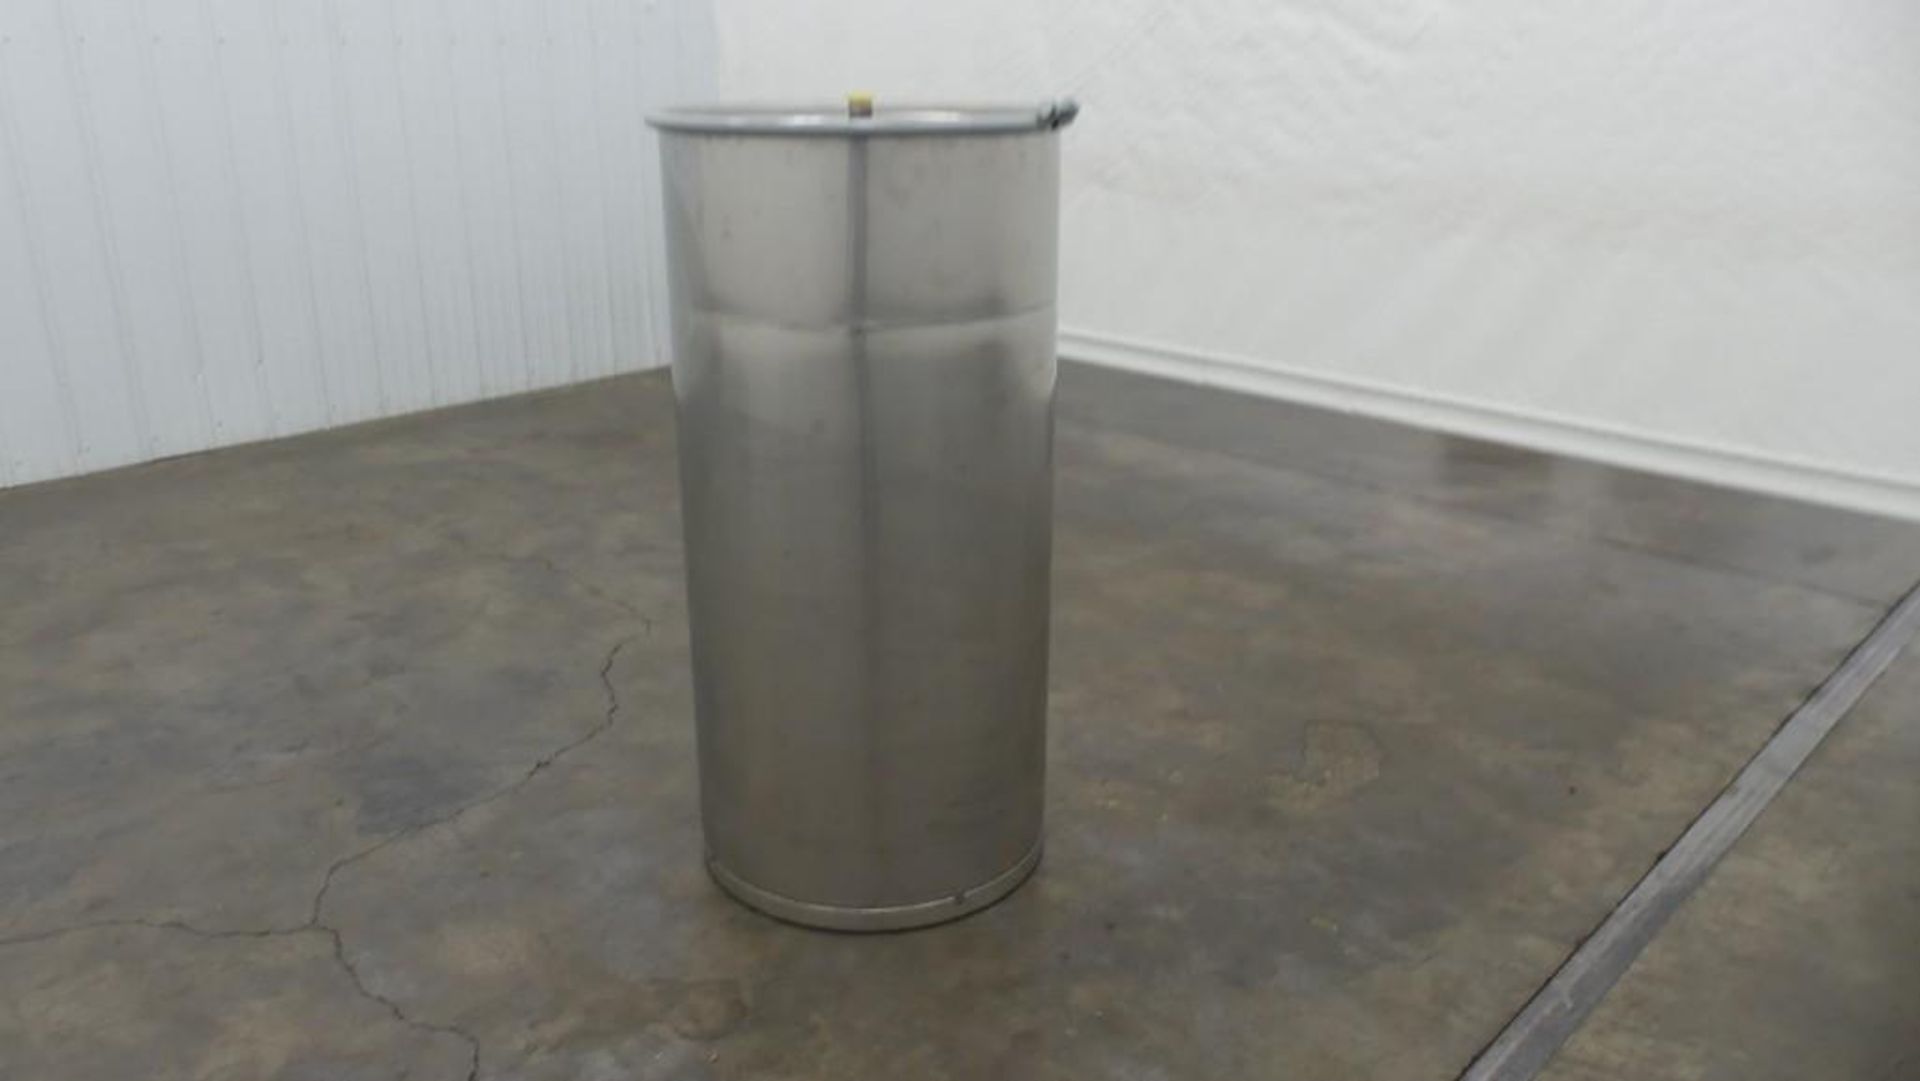 125 Gallon Stainless Steel Single Wall Tank - Image 2 of 6